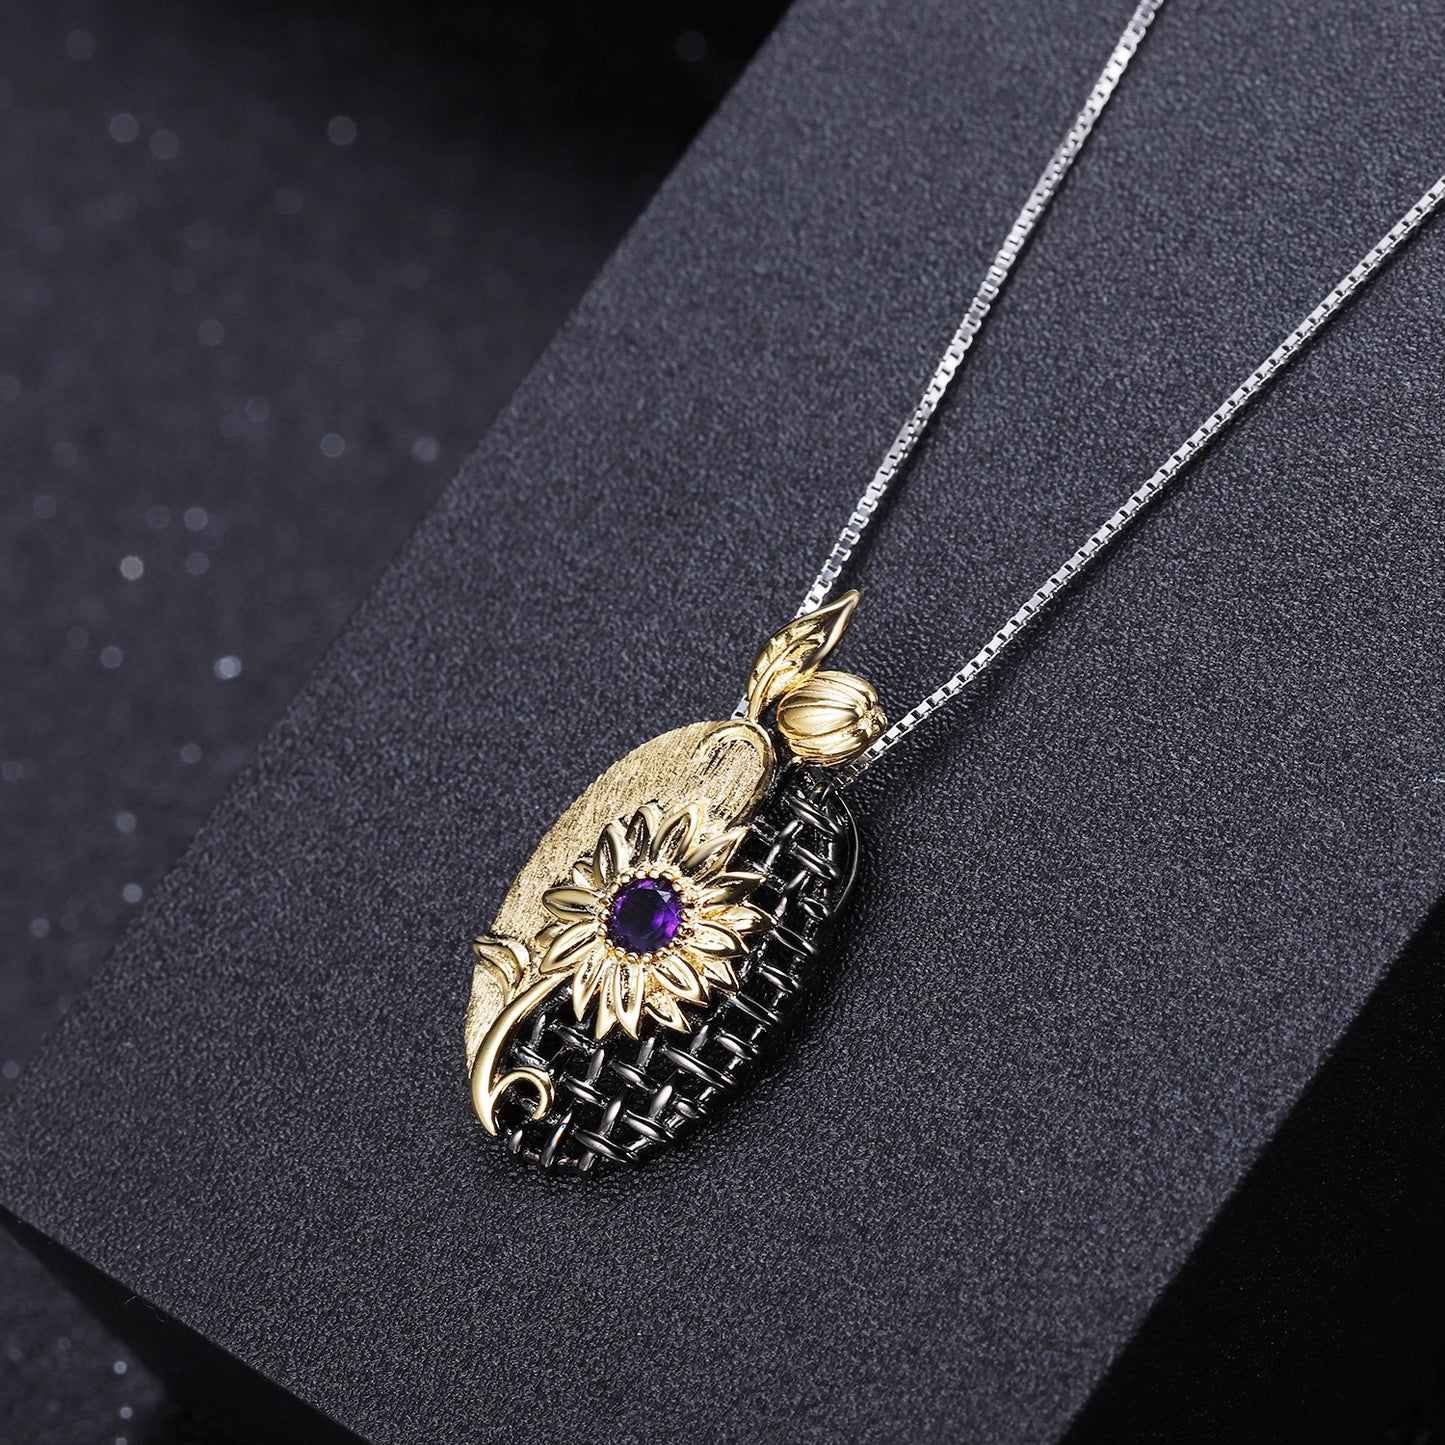 Italian Craft Design Other Shore Flower Luxury Sense Natural Amethyst Pendant Silver Necklace for Women